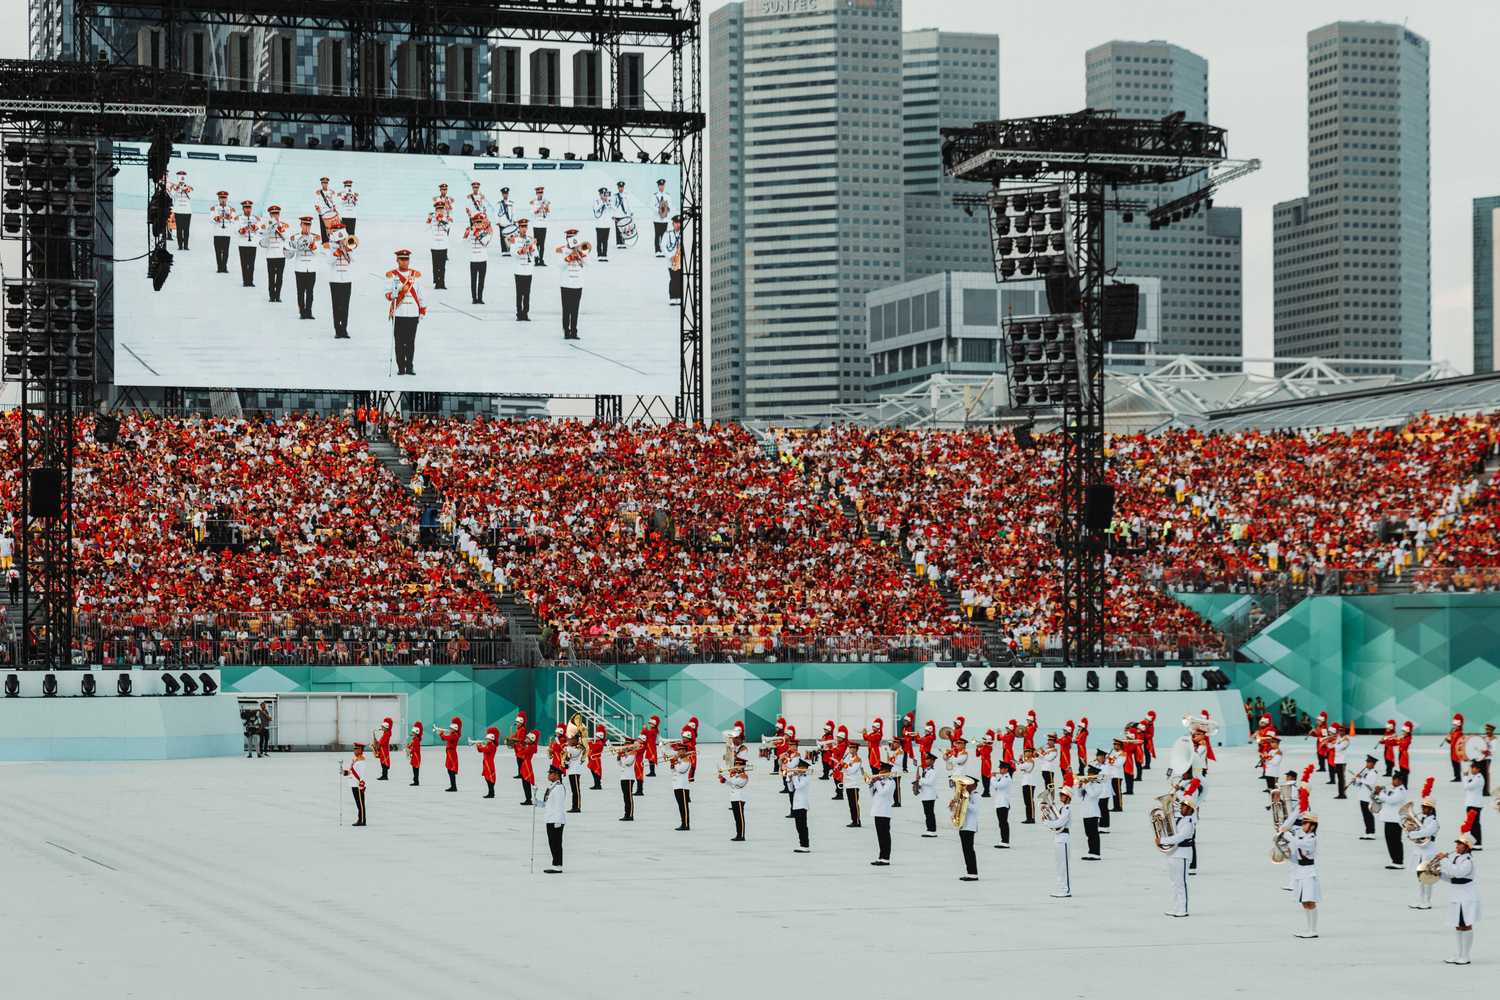 The SPF, SAF, and secondary school students from Bowen and Yuhua Secondary School putting up the military band. The stage is white. Some performers are wearing red top and black while others are wearing white uniform with black and white pants. The performers are holding instruments such as the tuba and trumpet. They are standing in alignment.